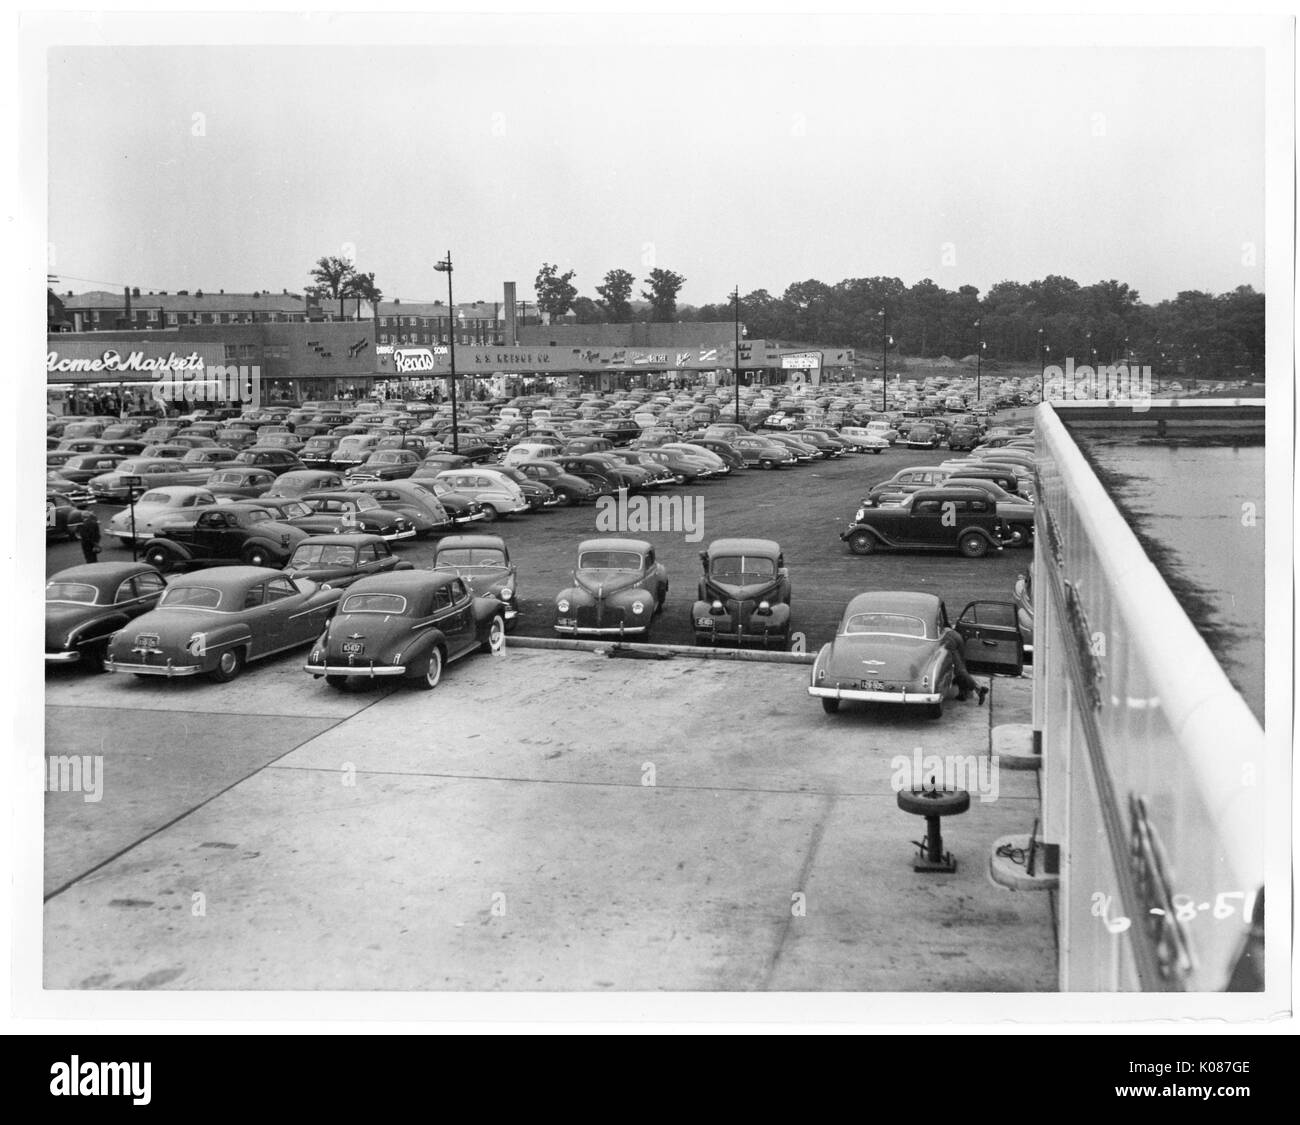 Parking lot of Northwood Shopping Center, hundreds of cars parked, Acme Markets and Reads in background, Baltimore, Maryland, 1930. Stock Photo